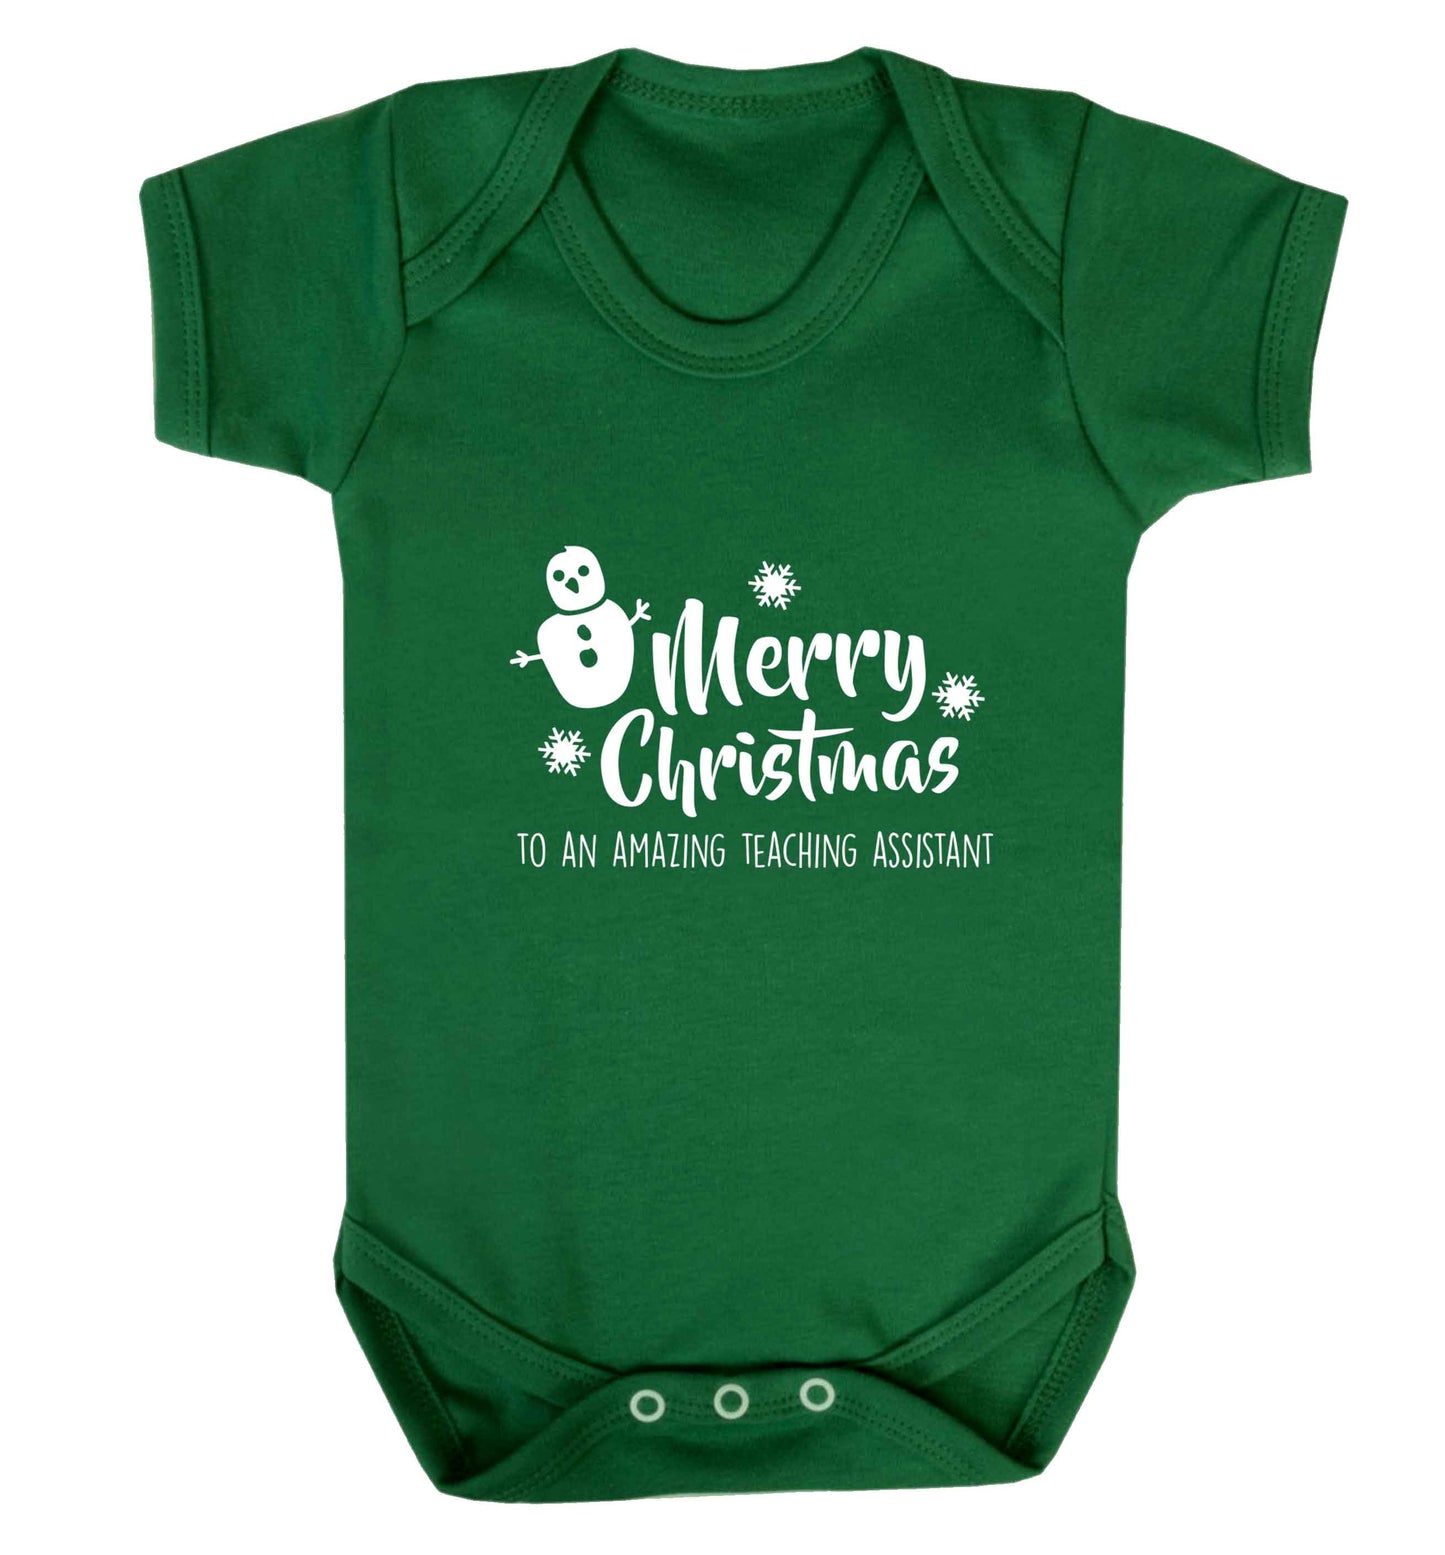 Merry christmas to my teacher baby vest green 18-24 months